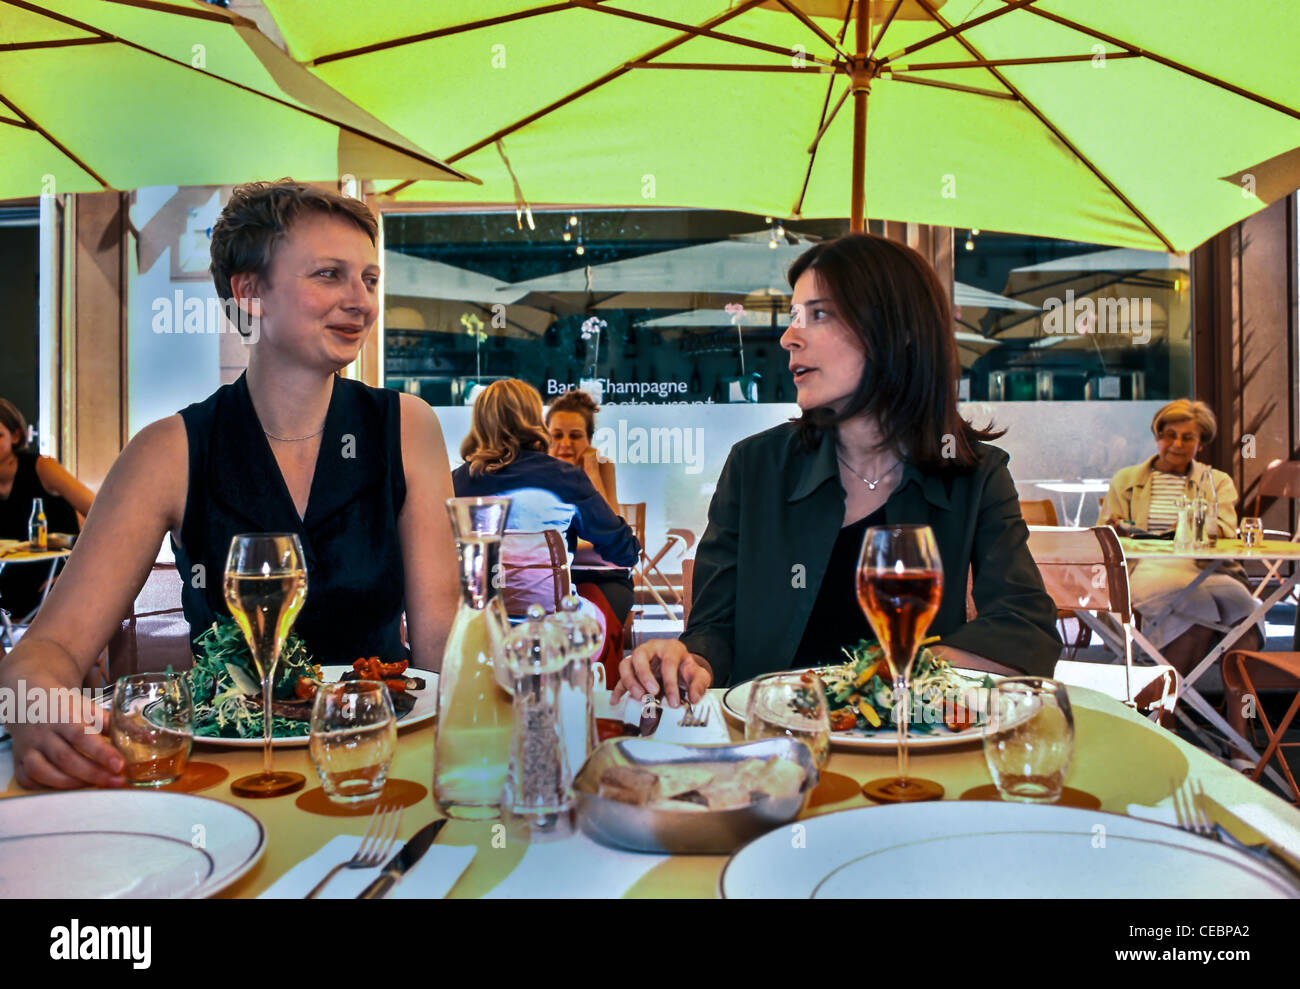 PARIS, France - Women Chatting, Sharing Lunch ion Terrace of Contemporary French Trendy Restaurant  (Now Closed) Conversation, Dining, Authentic French lifestyle Stock Photo